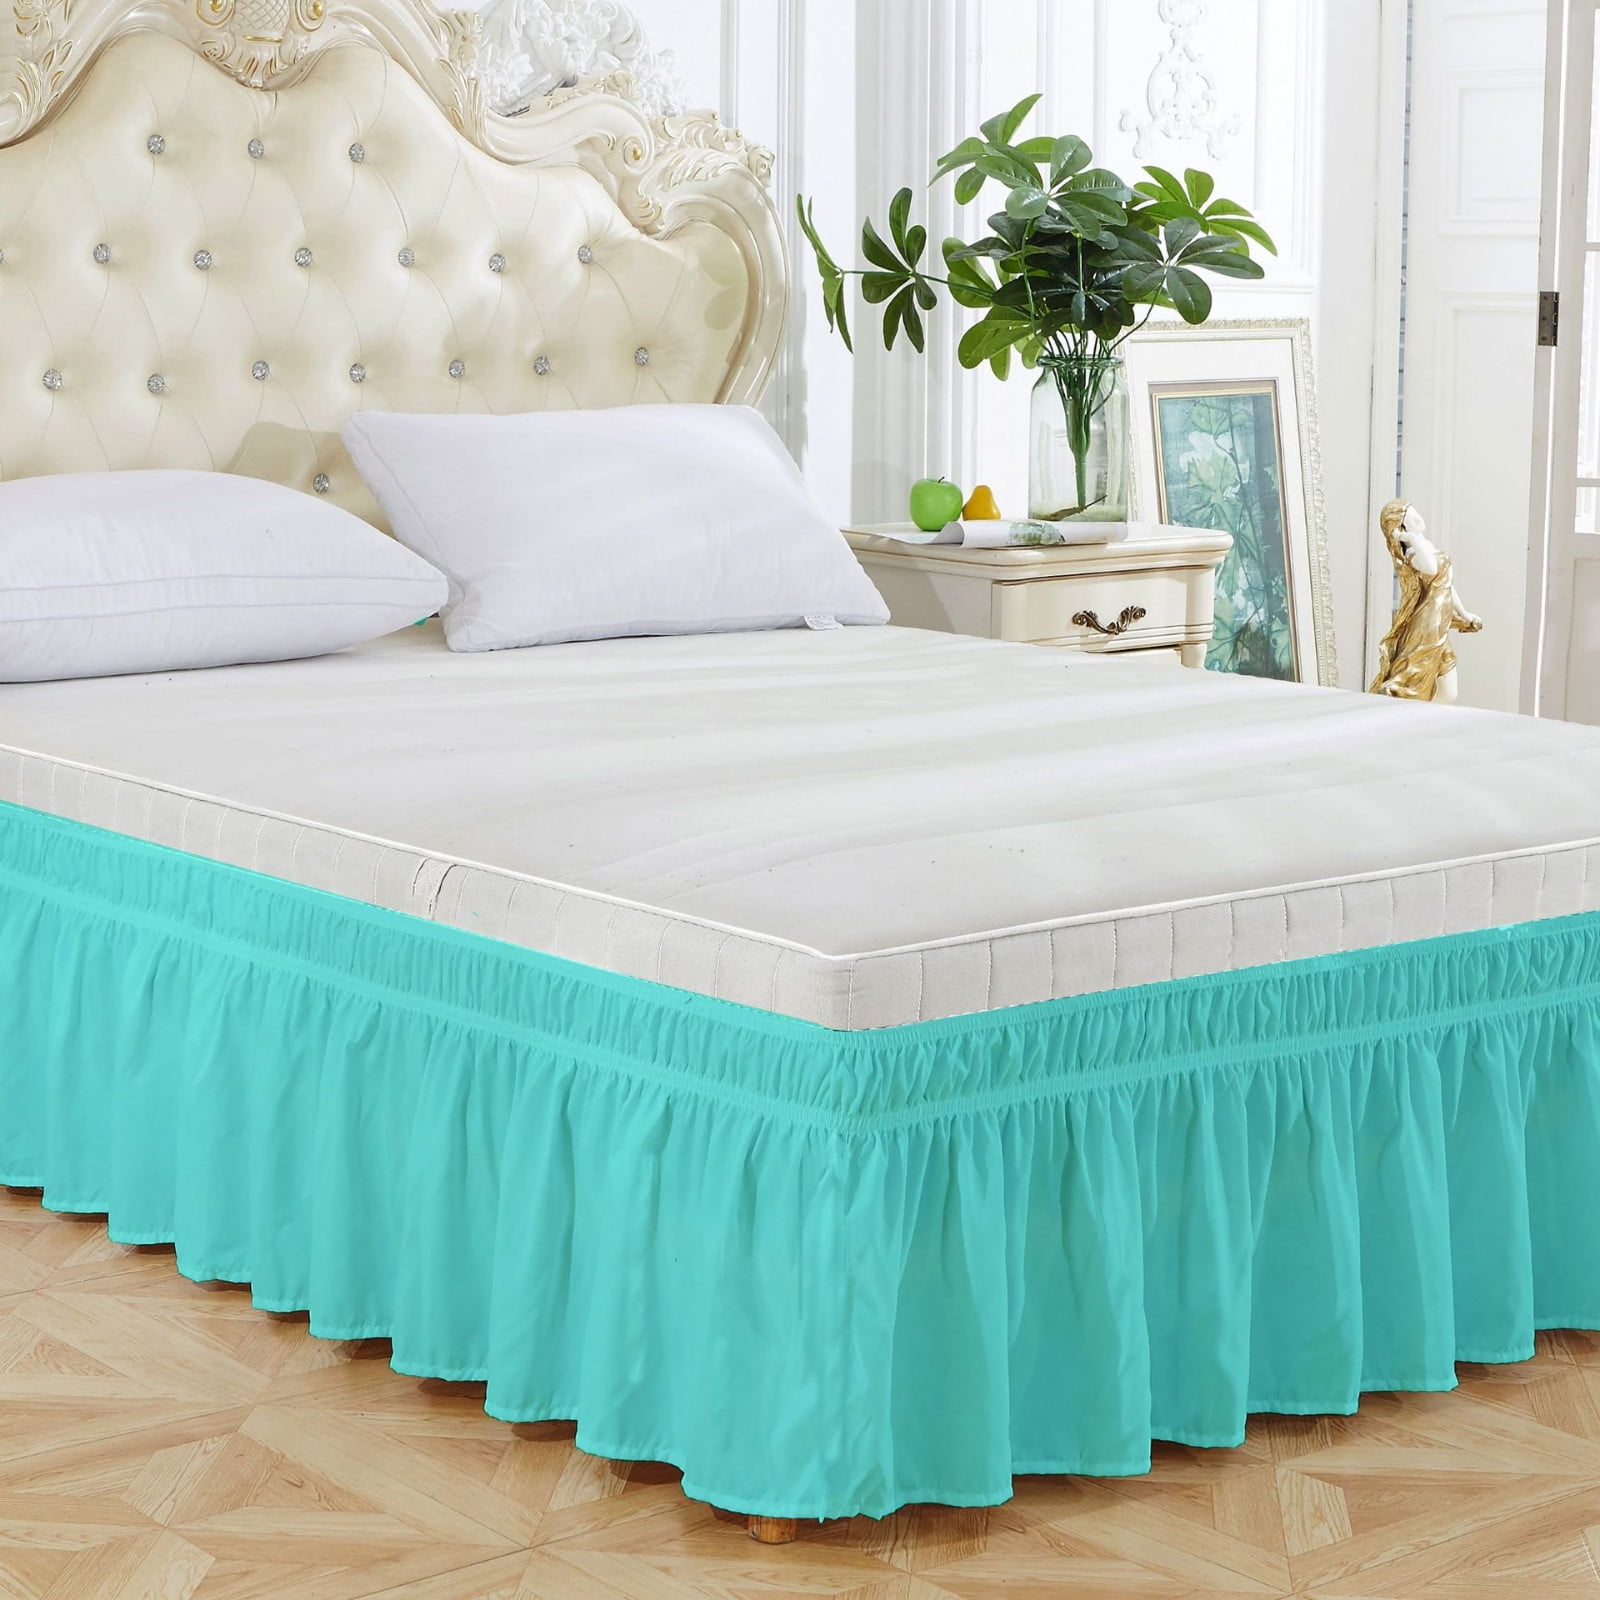 Xuan Dian White Bed Skirts Full Size Bed Ruffle Skirts Dust Ruffle With Bed Skir 